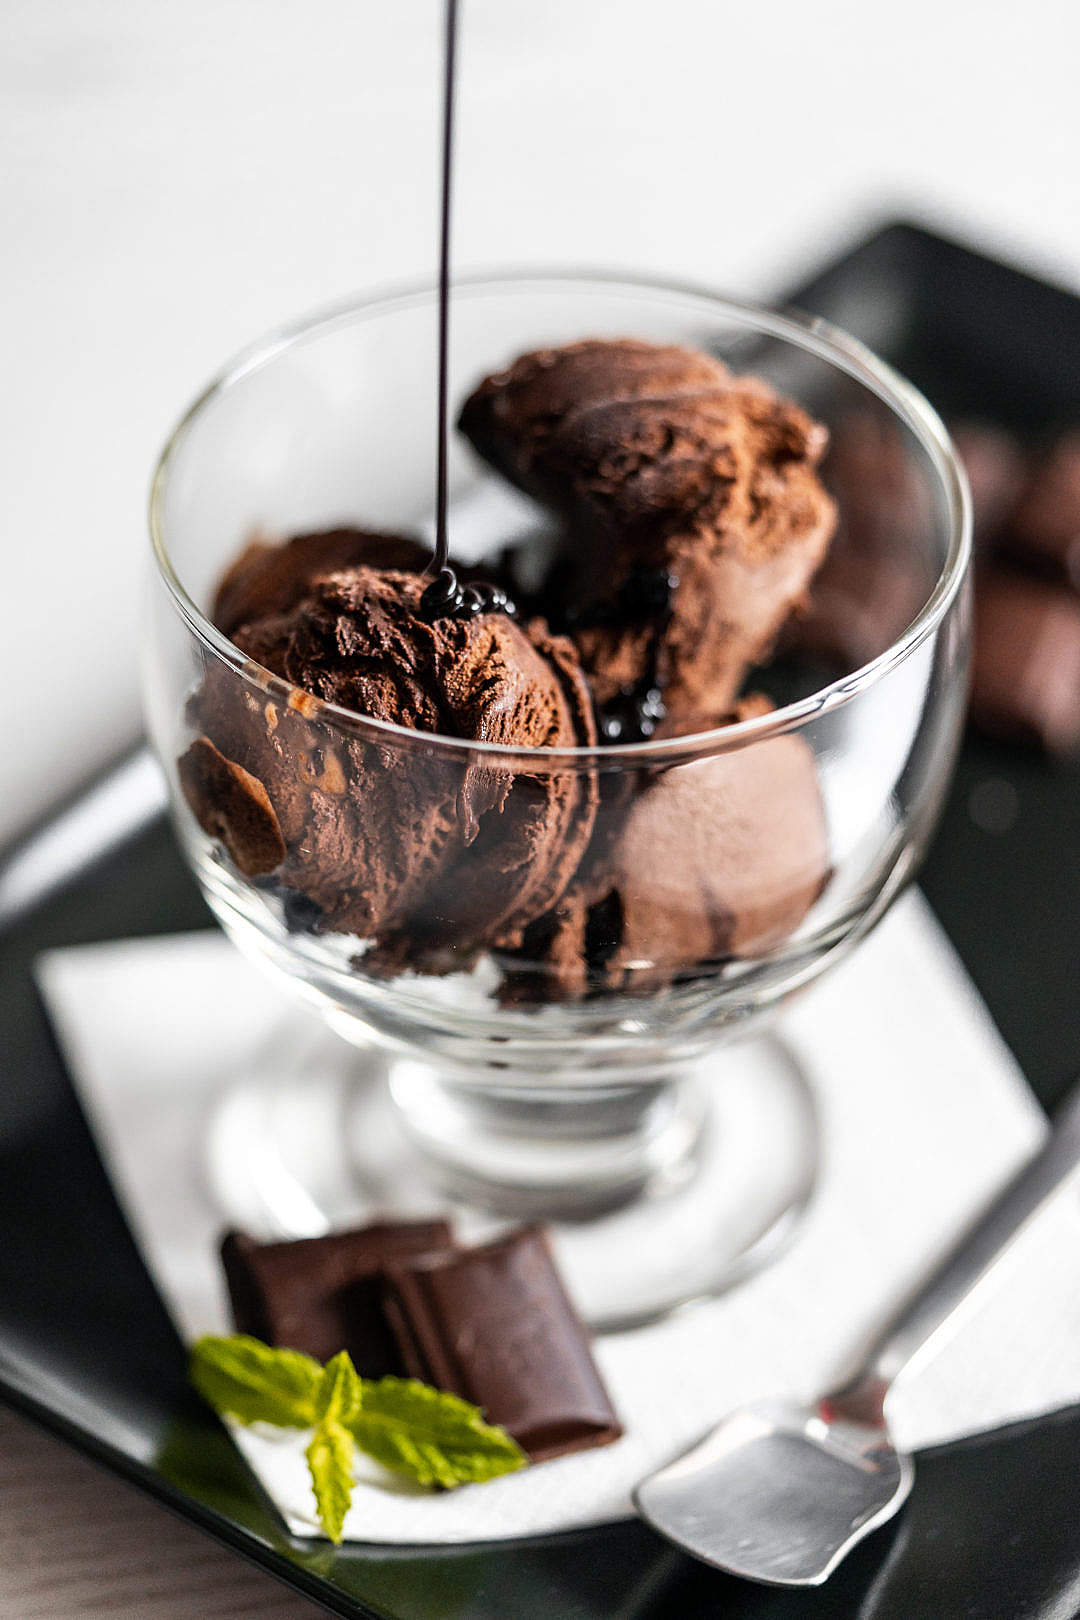 Download Pouring Chocolate Topping on The Ice-cream Sundae FREE Stock Photo